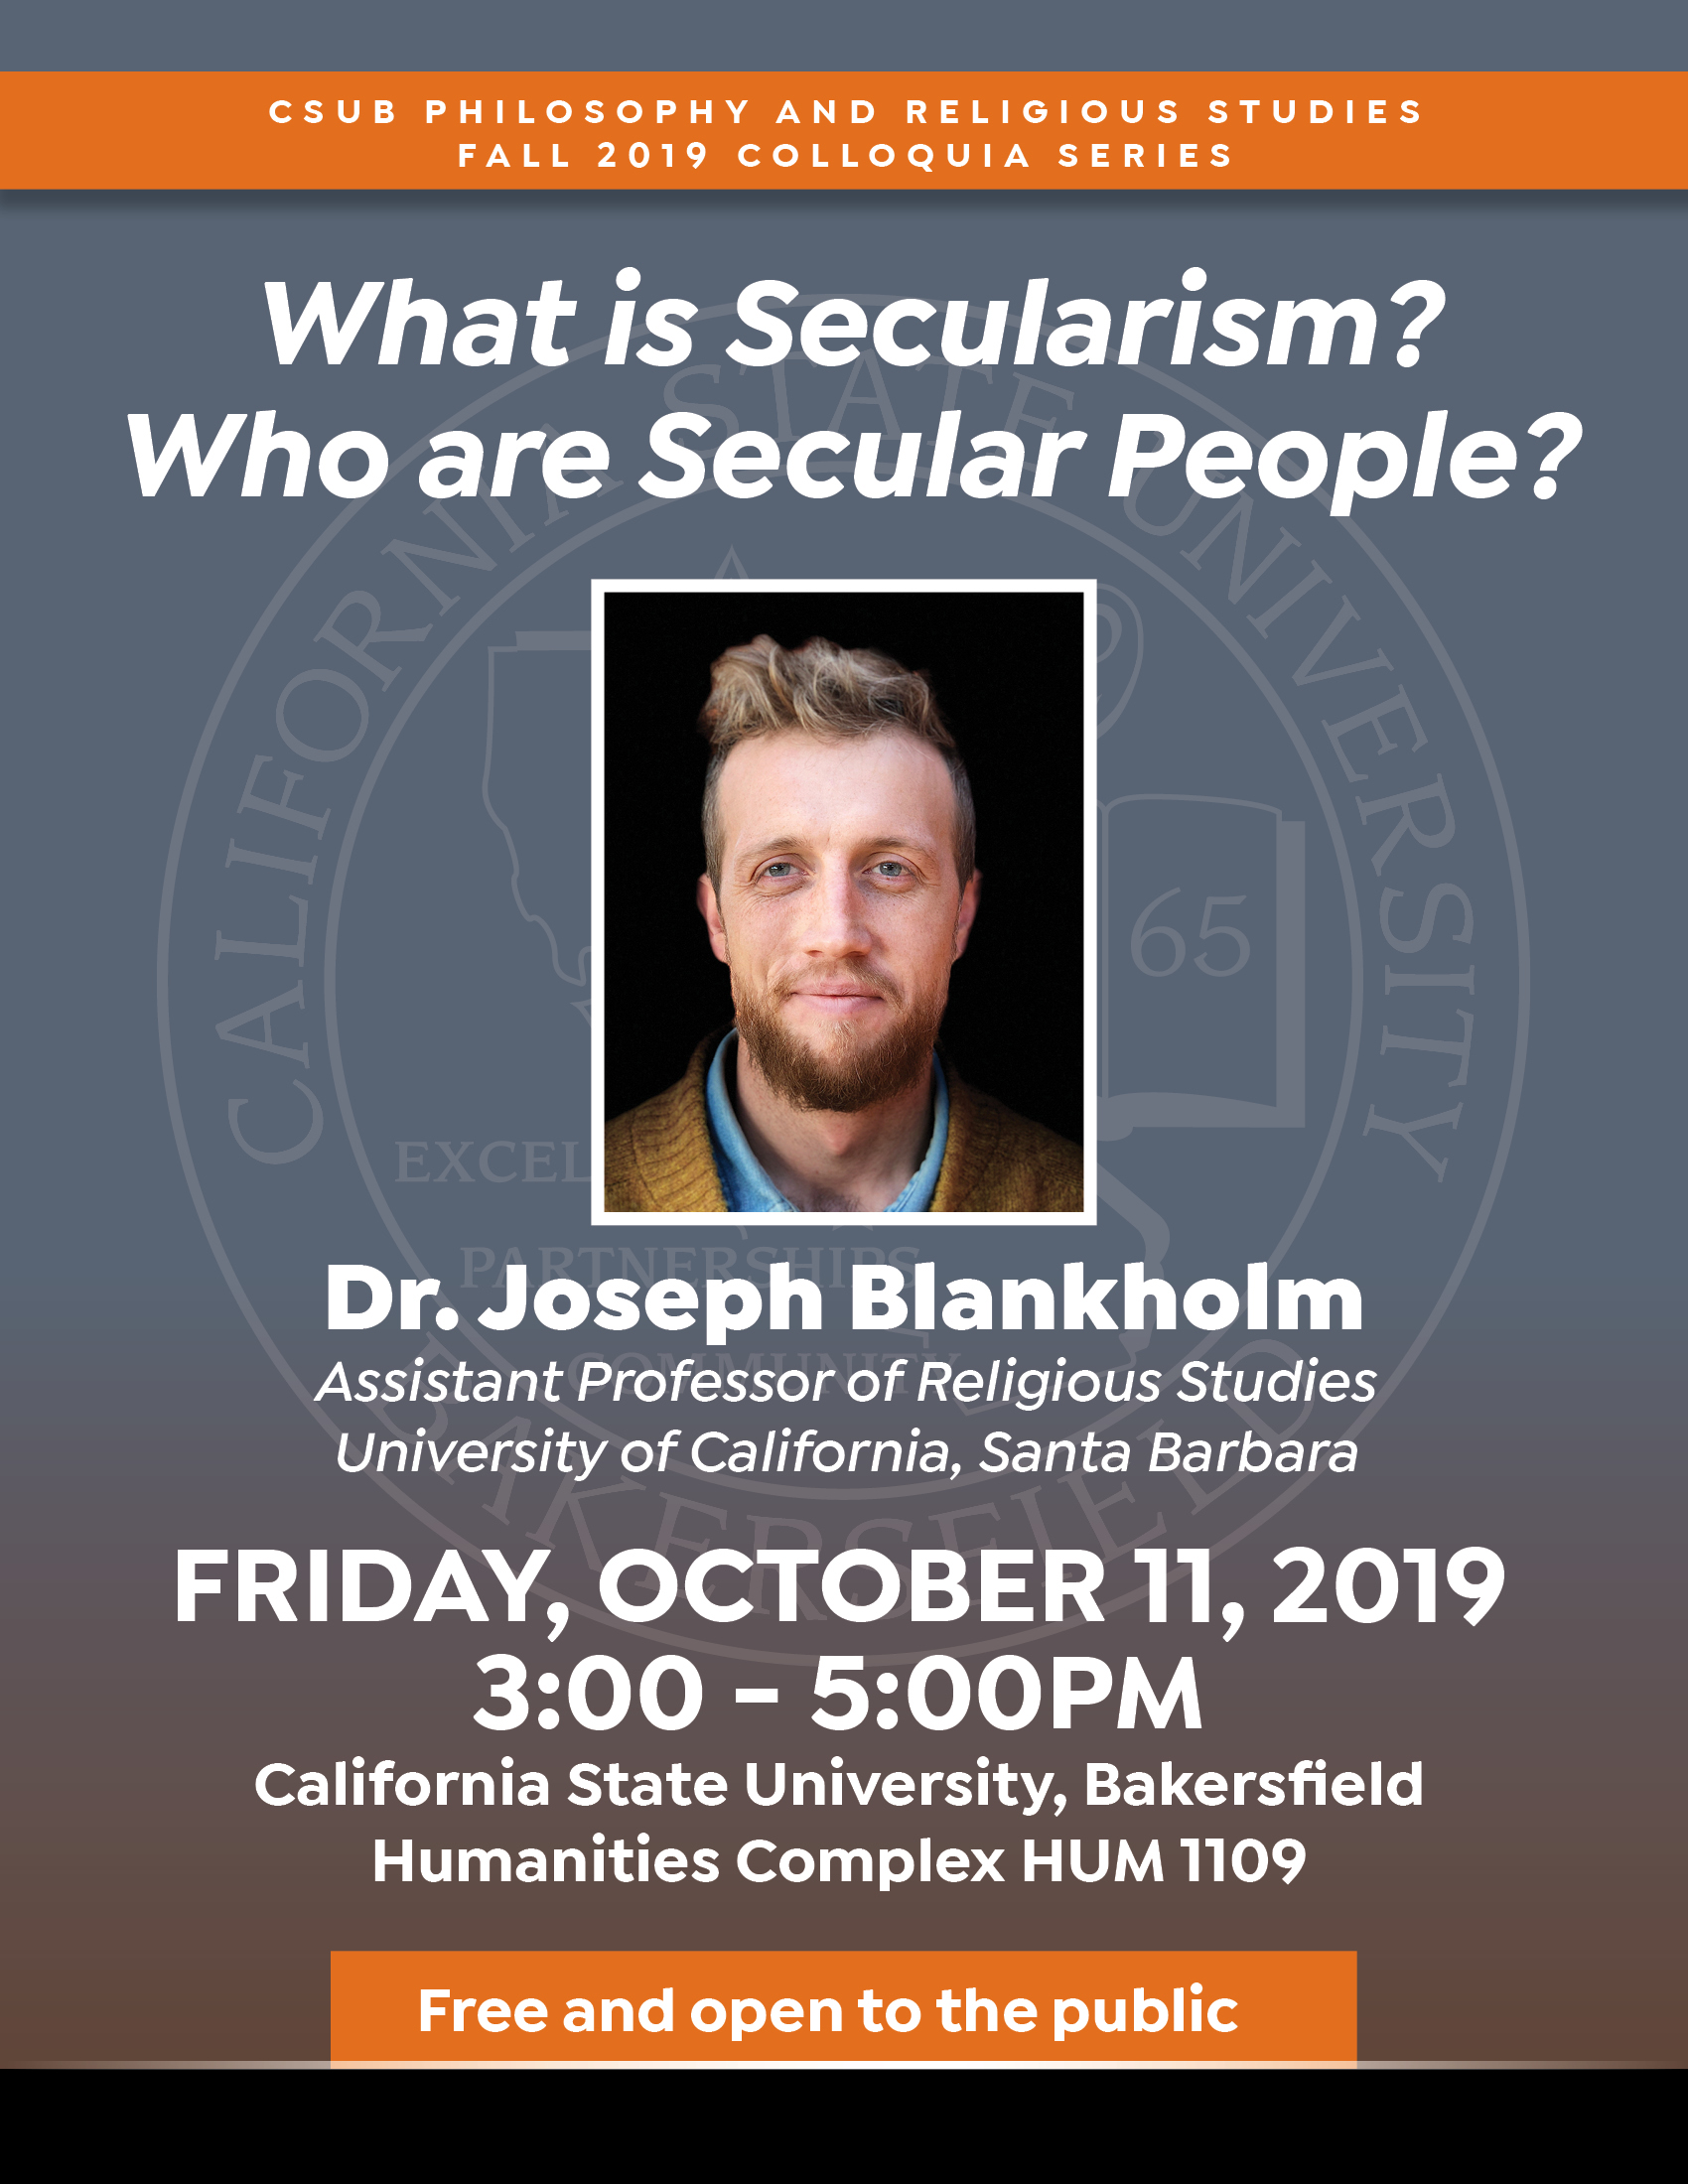 What is Secularism flyer